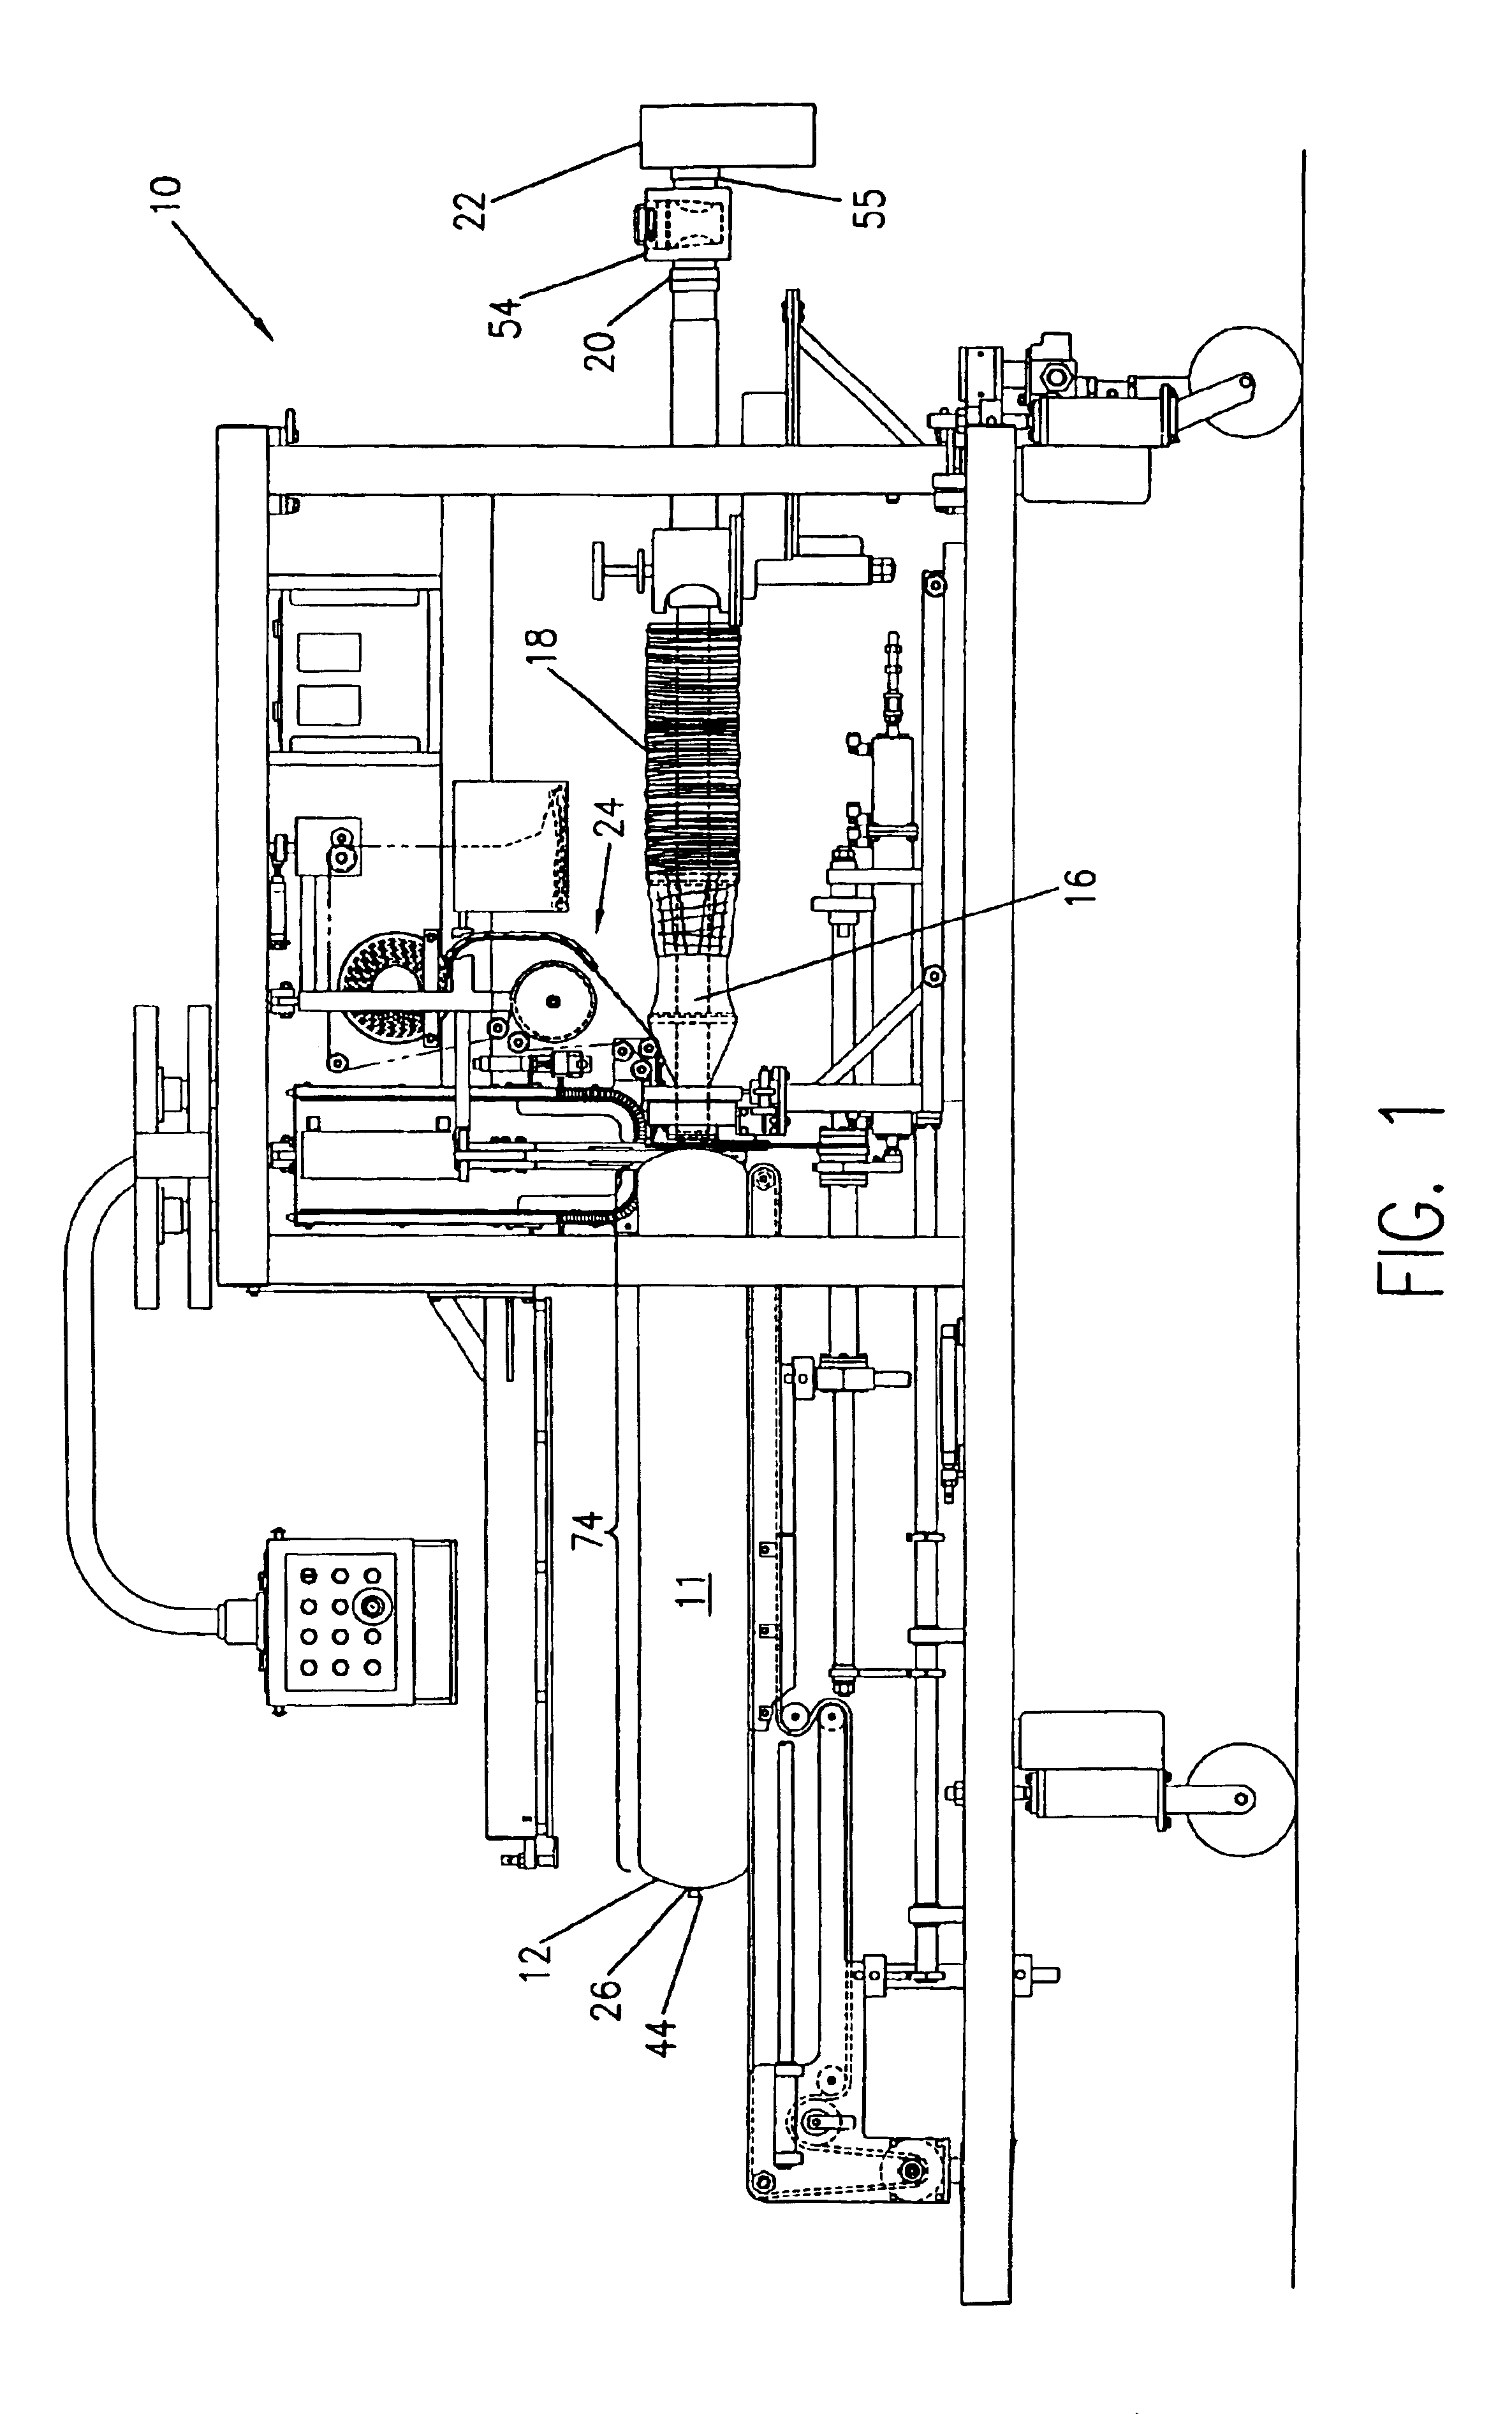 Apparatus for automatically stuffing food casing